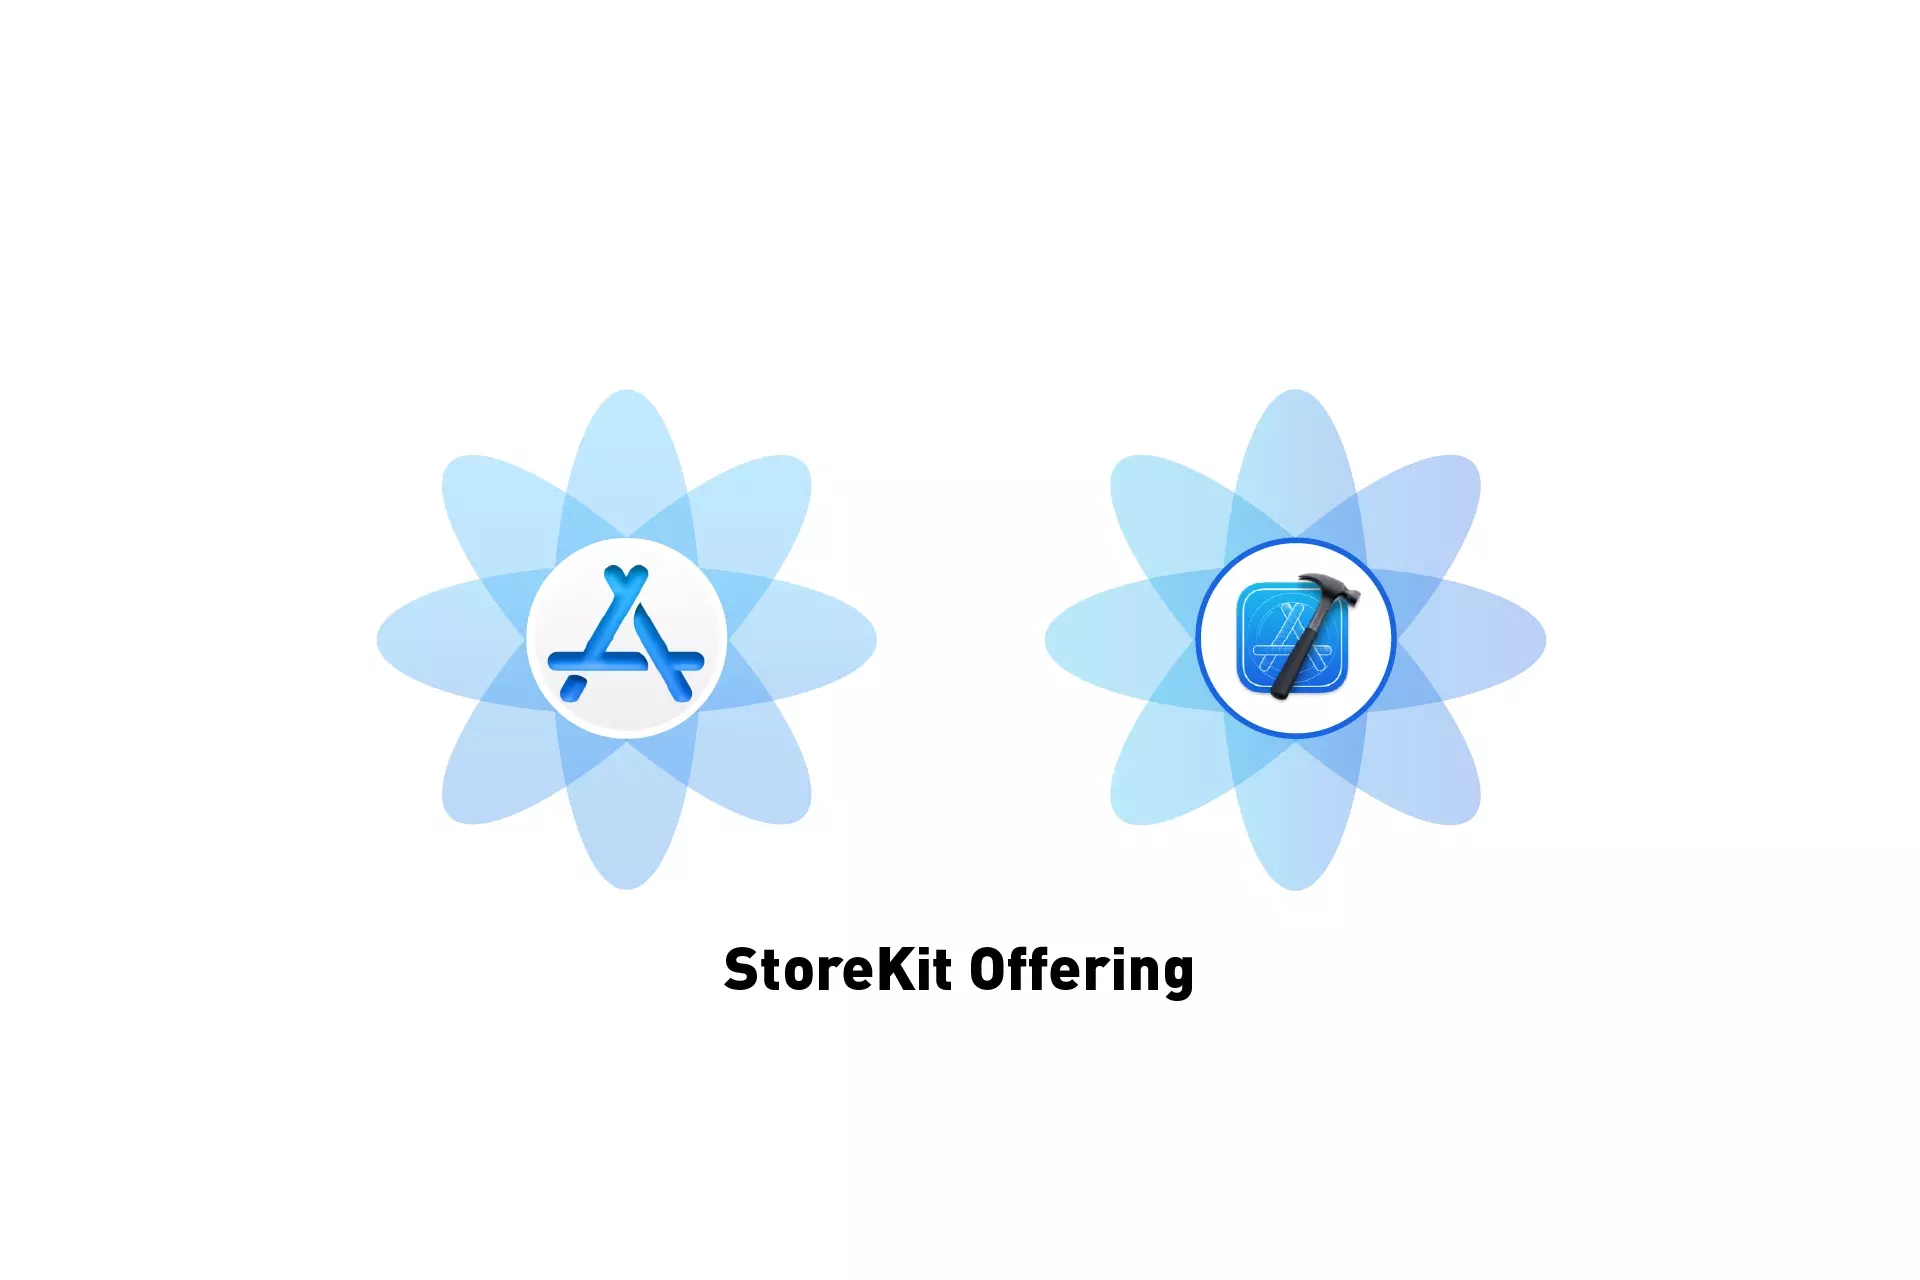 Two flowers that represents App Store Connect and XCode with the text "StoreKit Offering" beneath them.